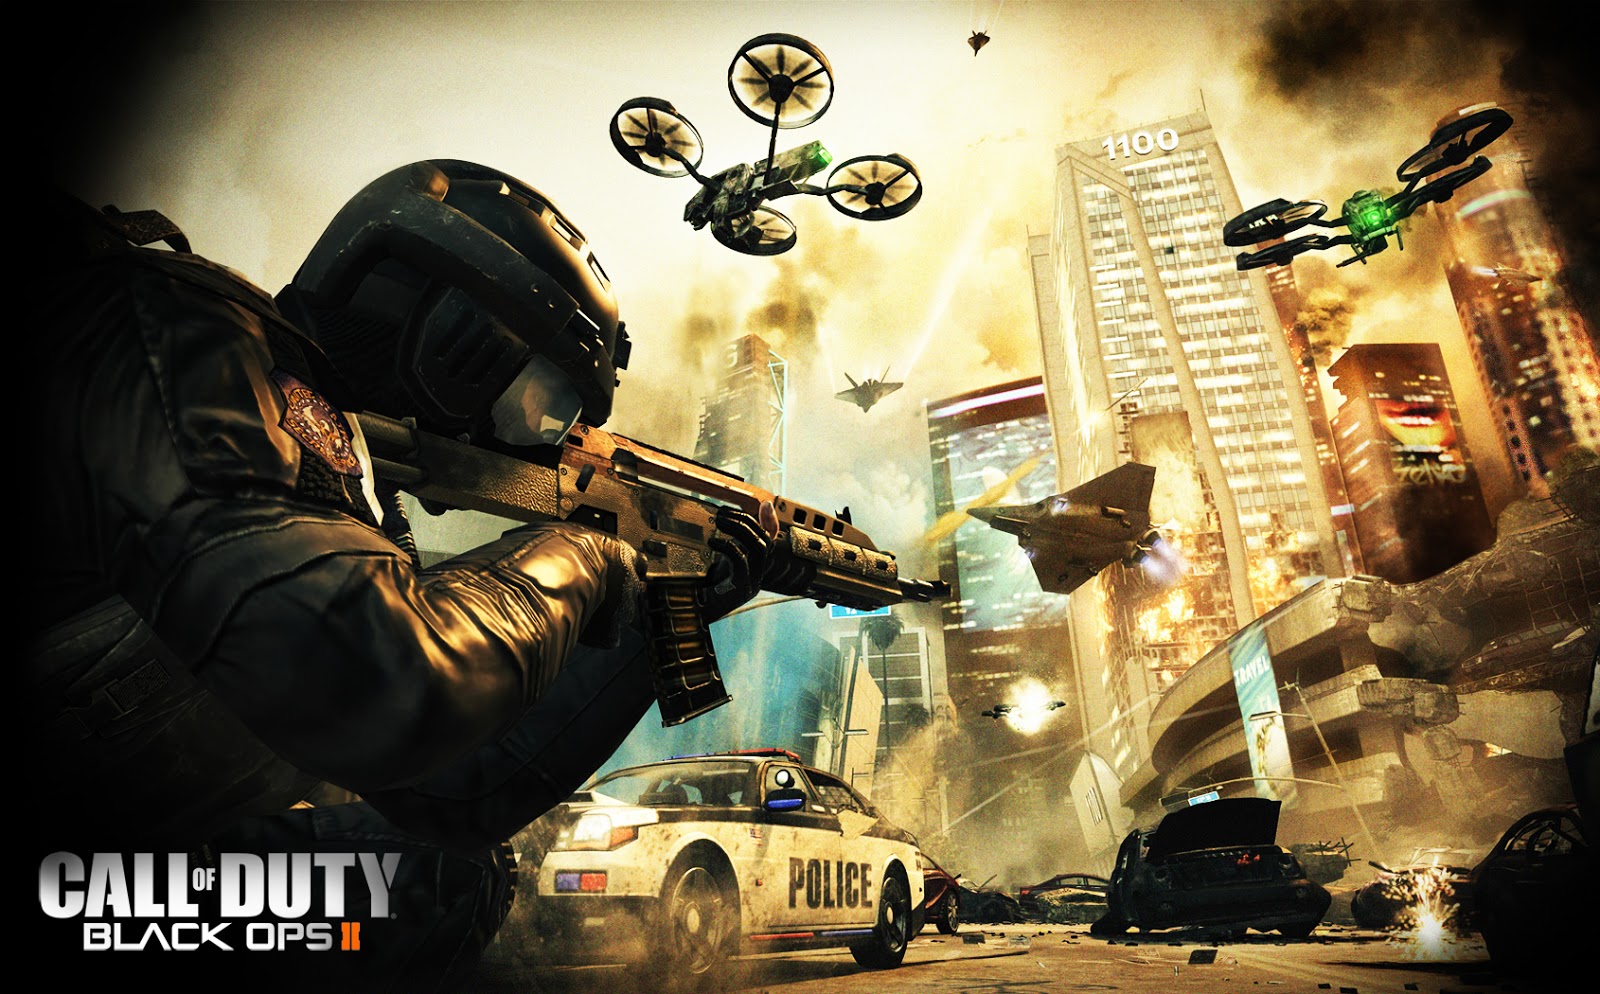 HD WALLPAPERS Call of Duty Black ops 2 HD Wallpapers 1600x994